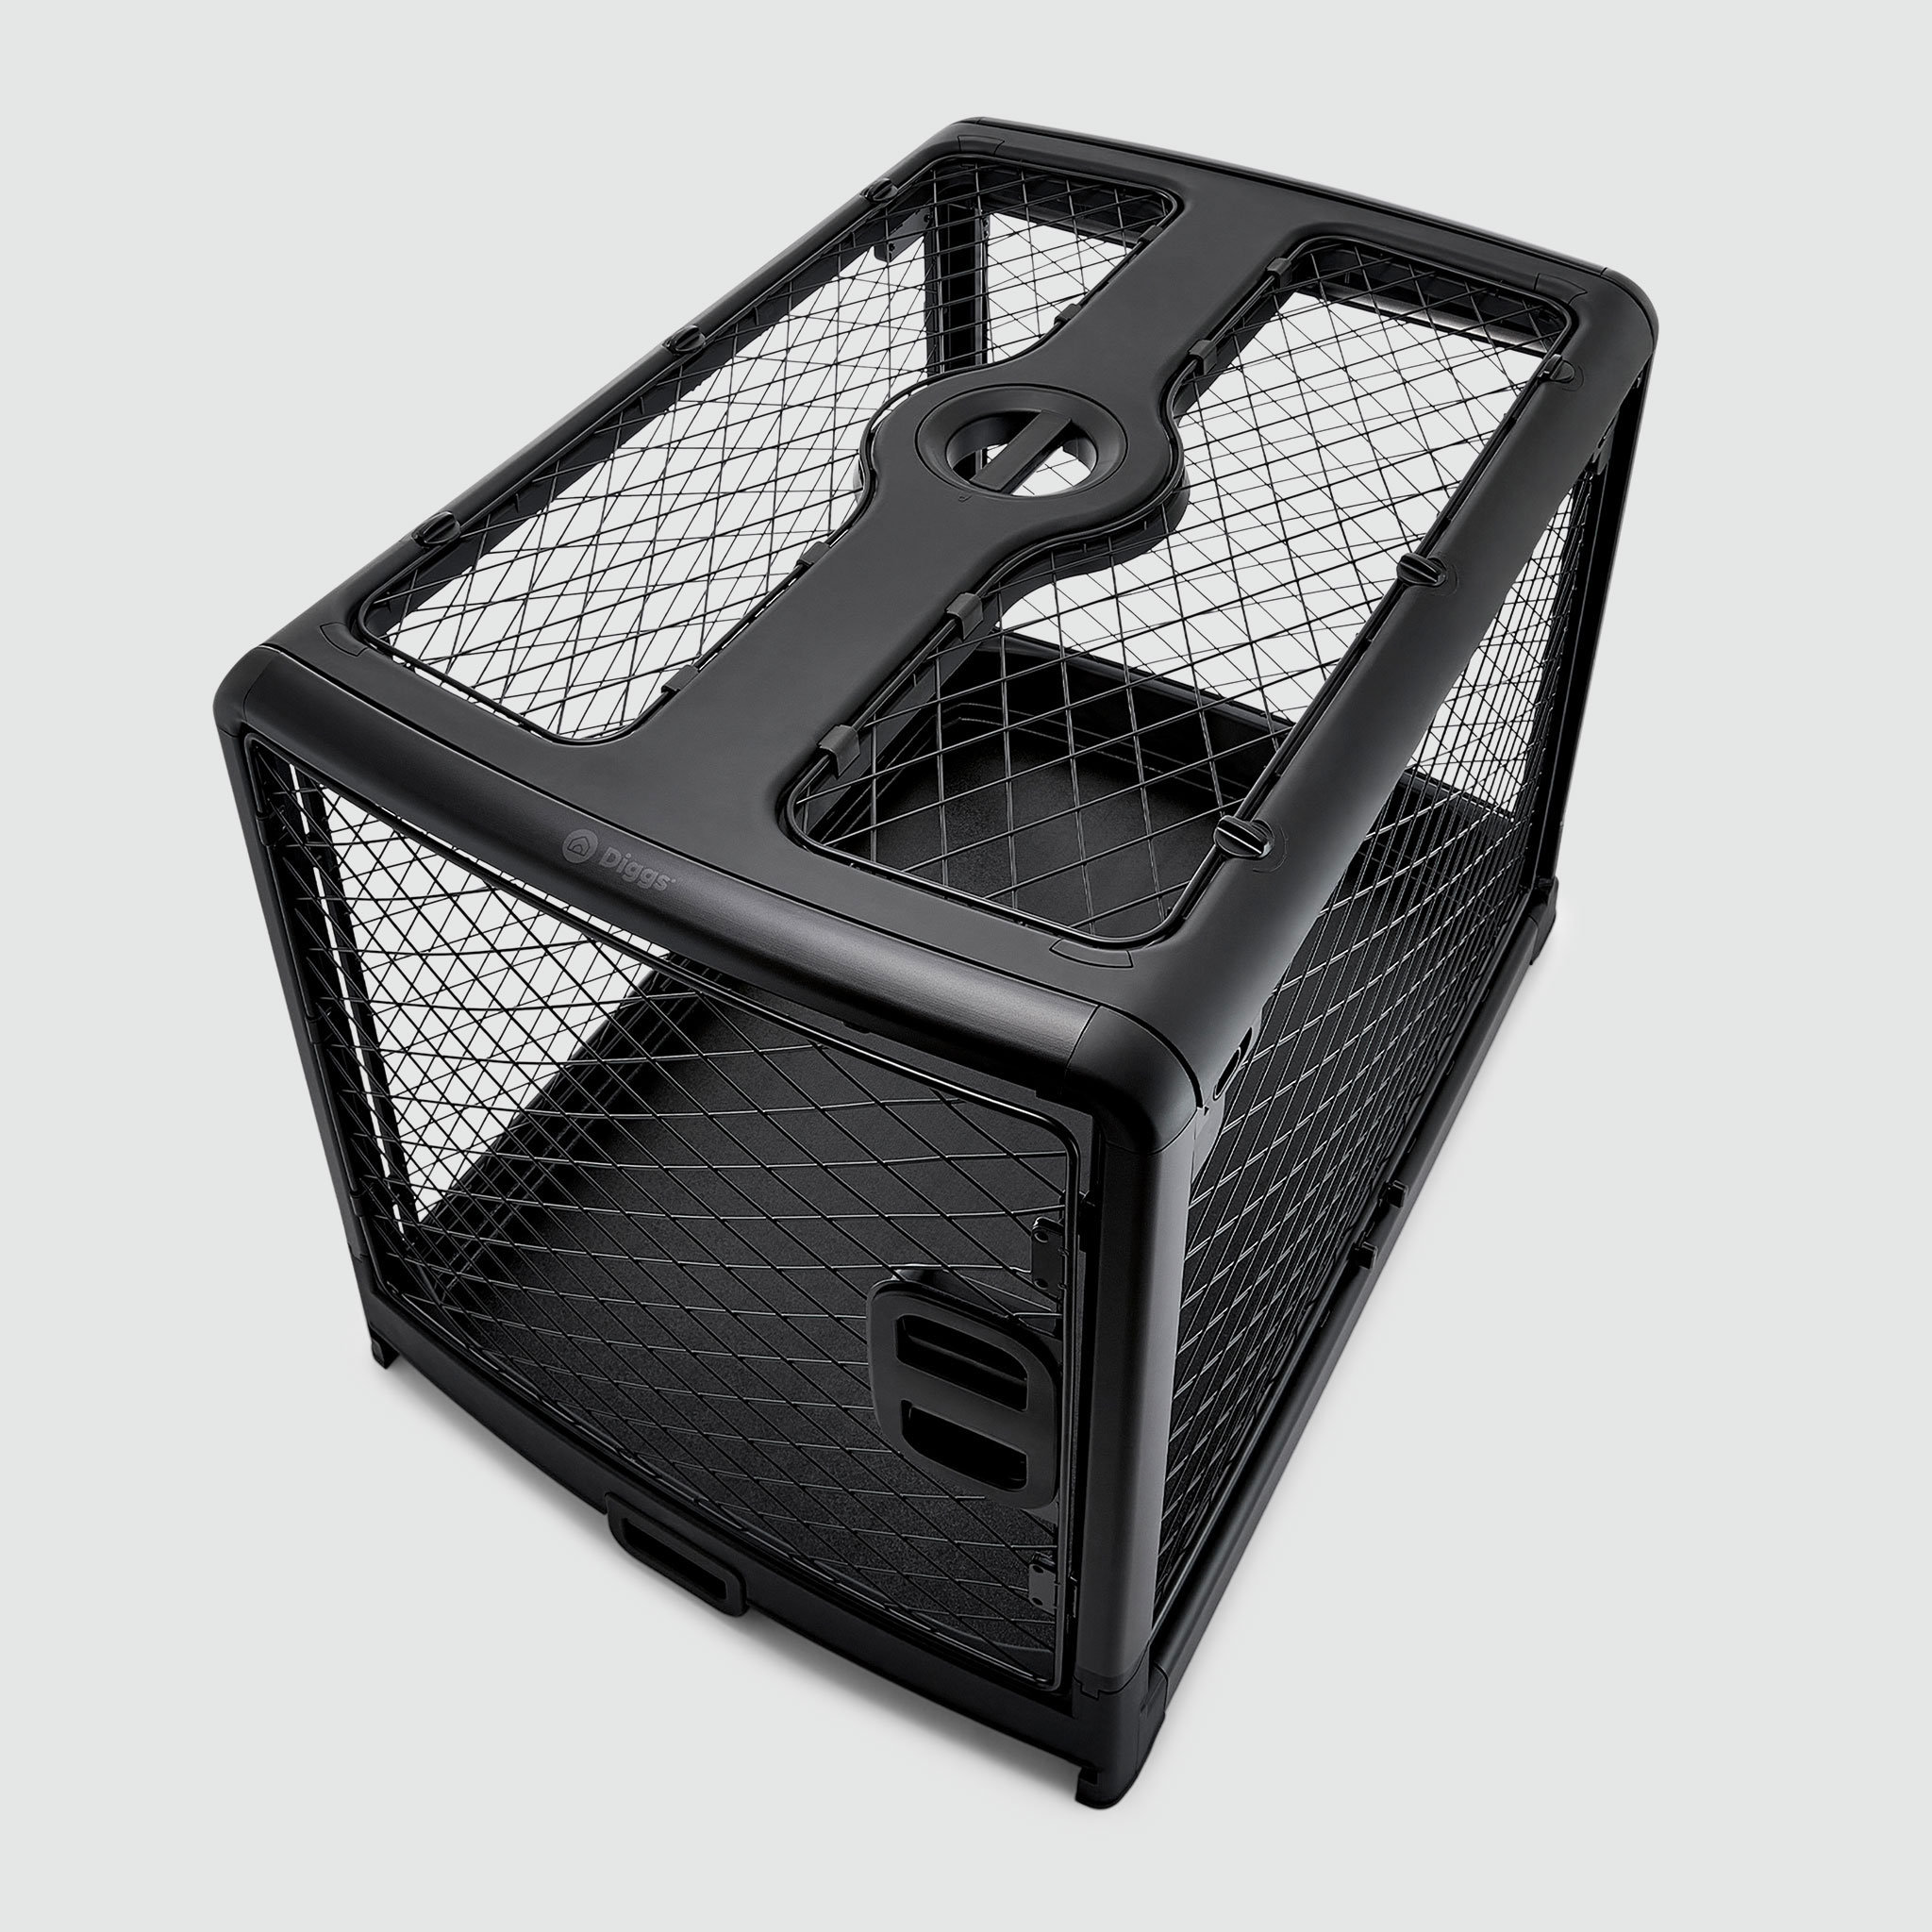 Crate & Carrier Set - Diggs